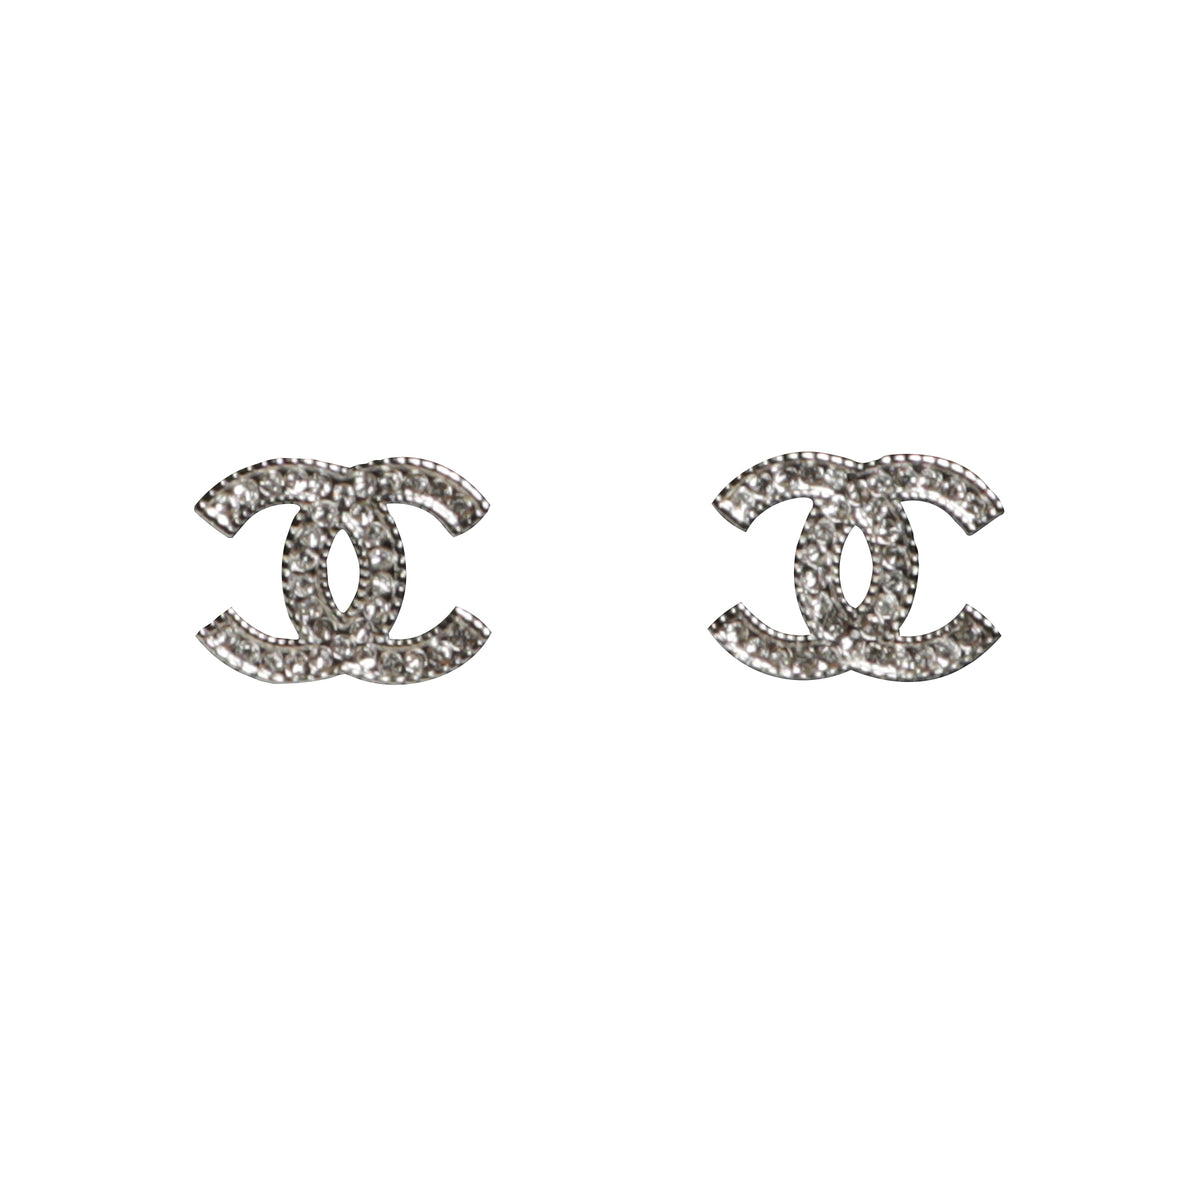 Authentic Chanel Crystal CC Logo Post Earrings - Silver